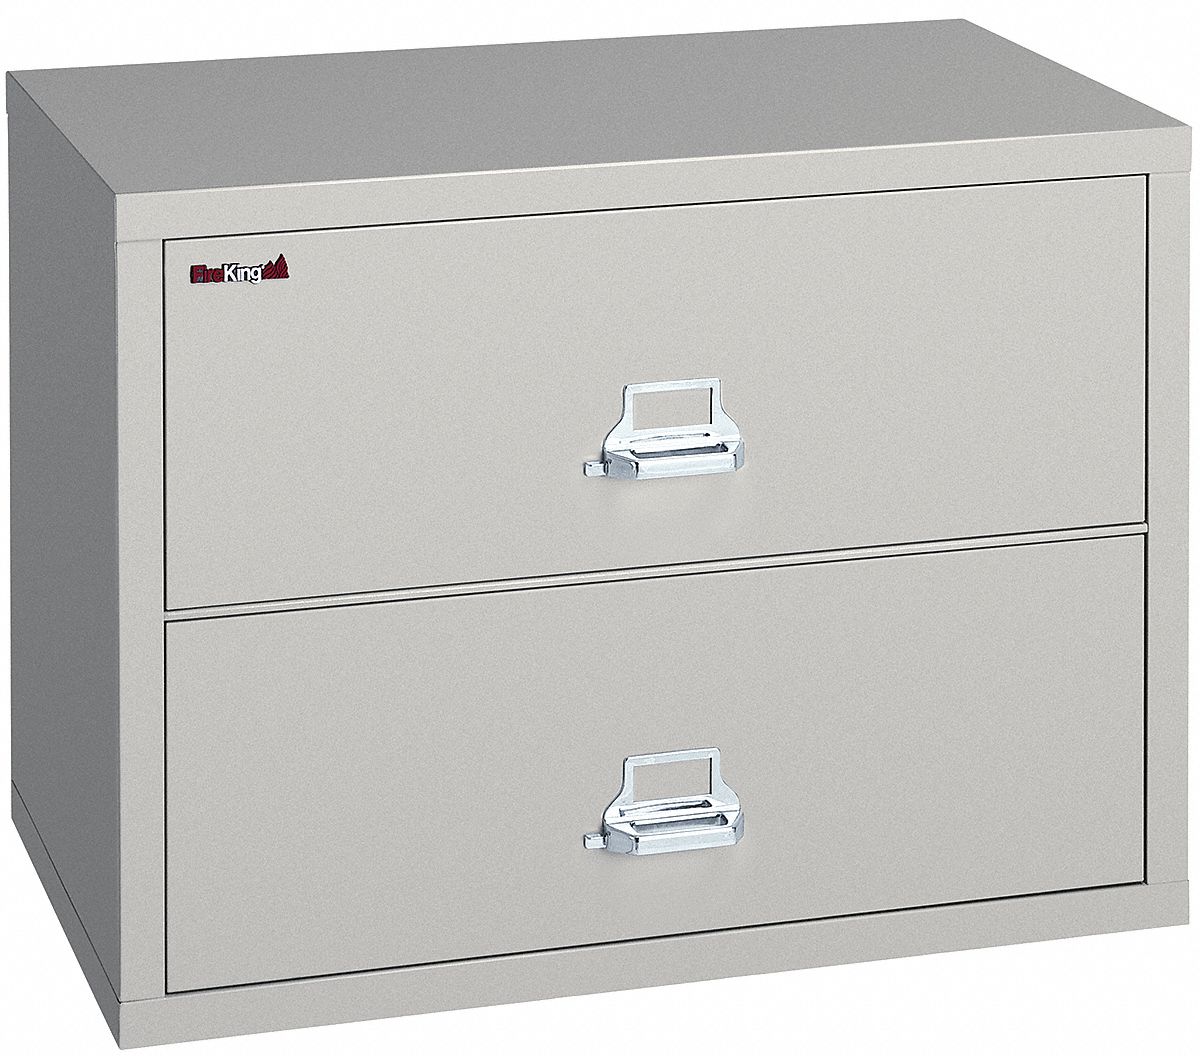 Fireking Lateral File 2 Drawer 37 1 2 In W 11x413 2 3822 Cpa